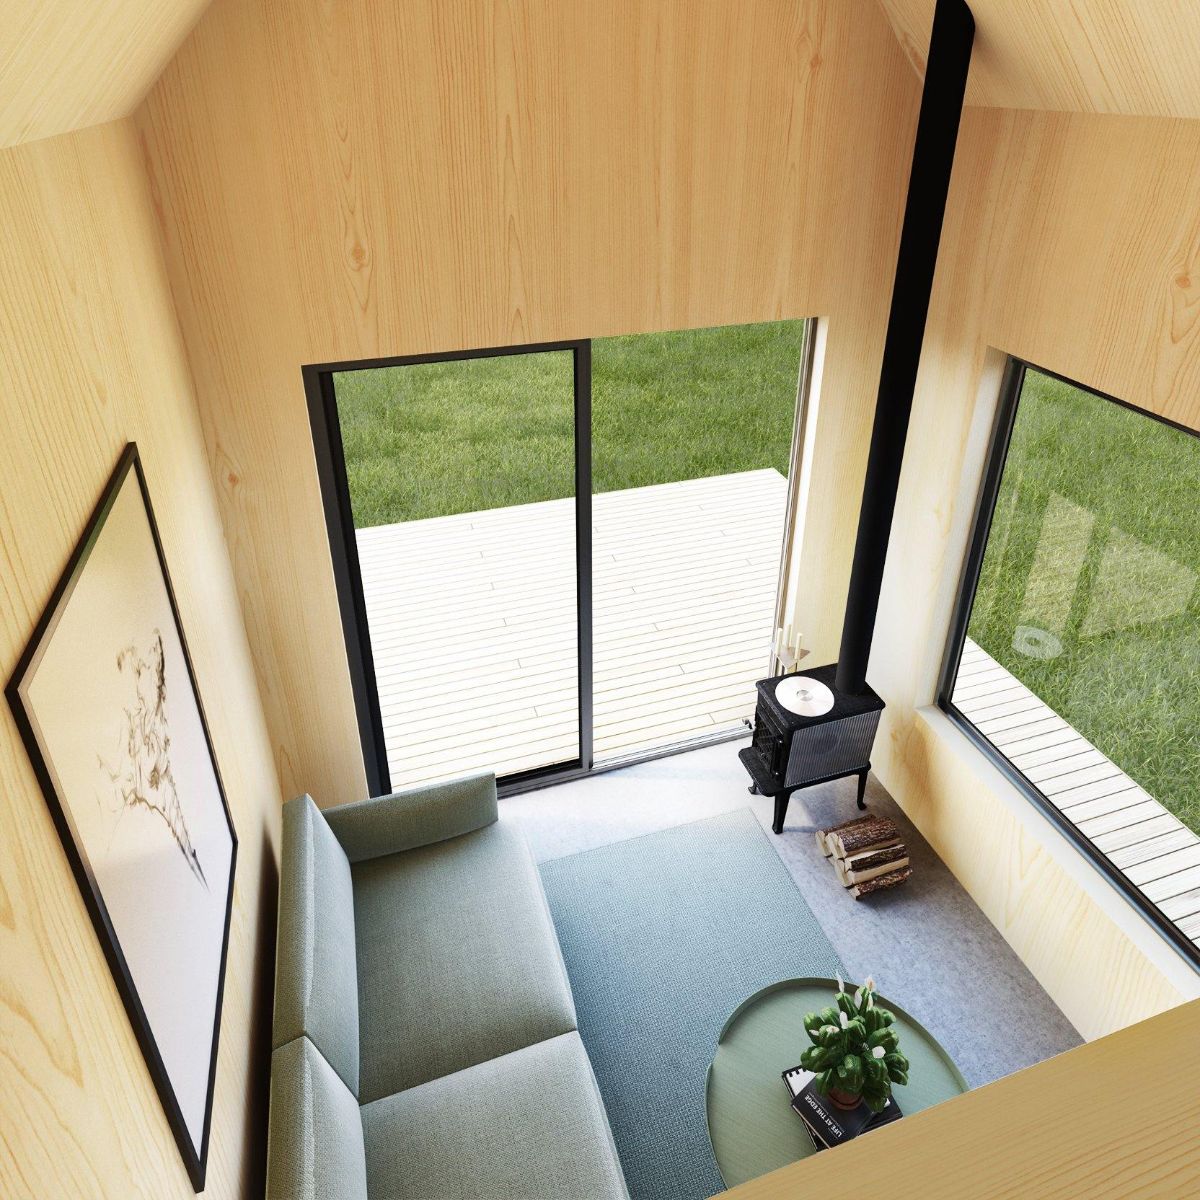 image of living space from loft inside cabin